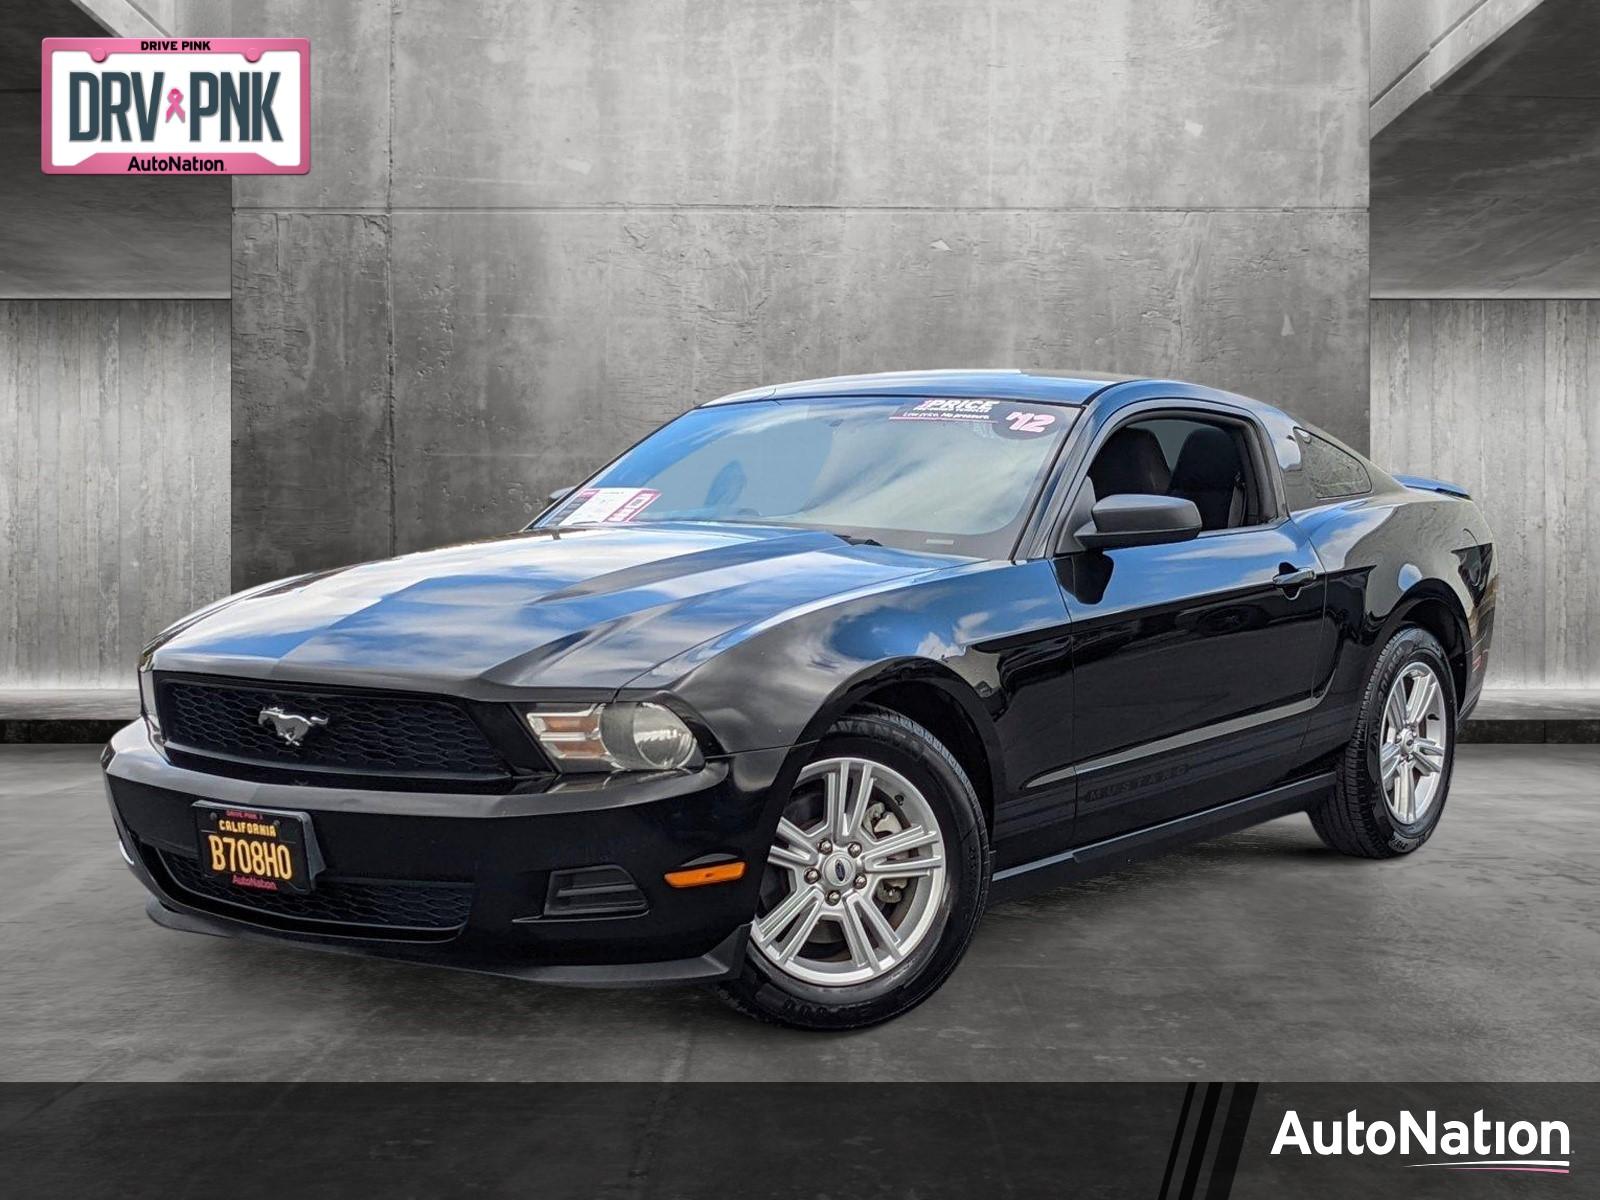 2012 Ford Mustang Vehicle Photo in VALENCIA, CA 91355-1705